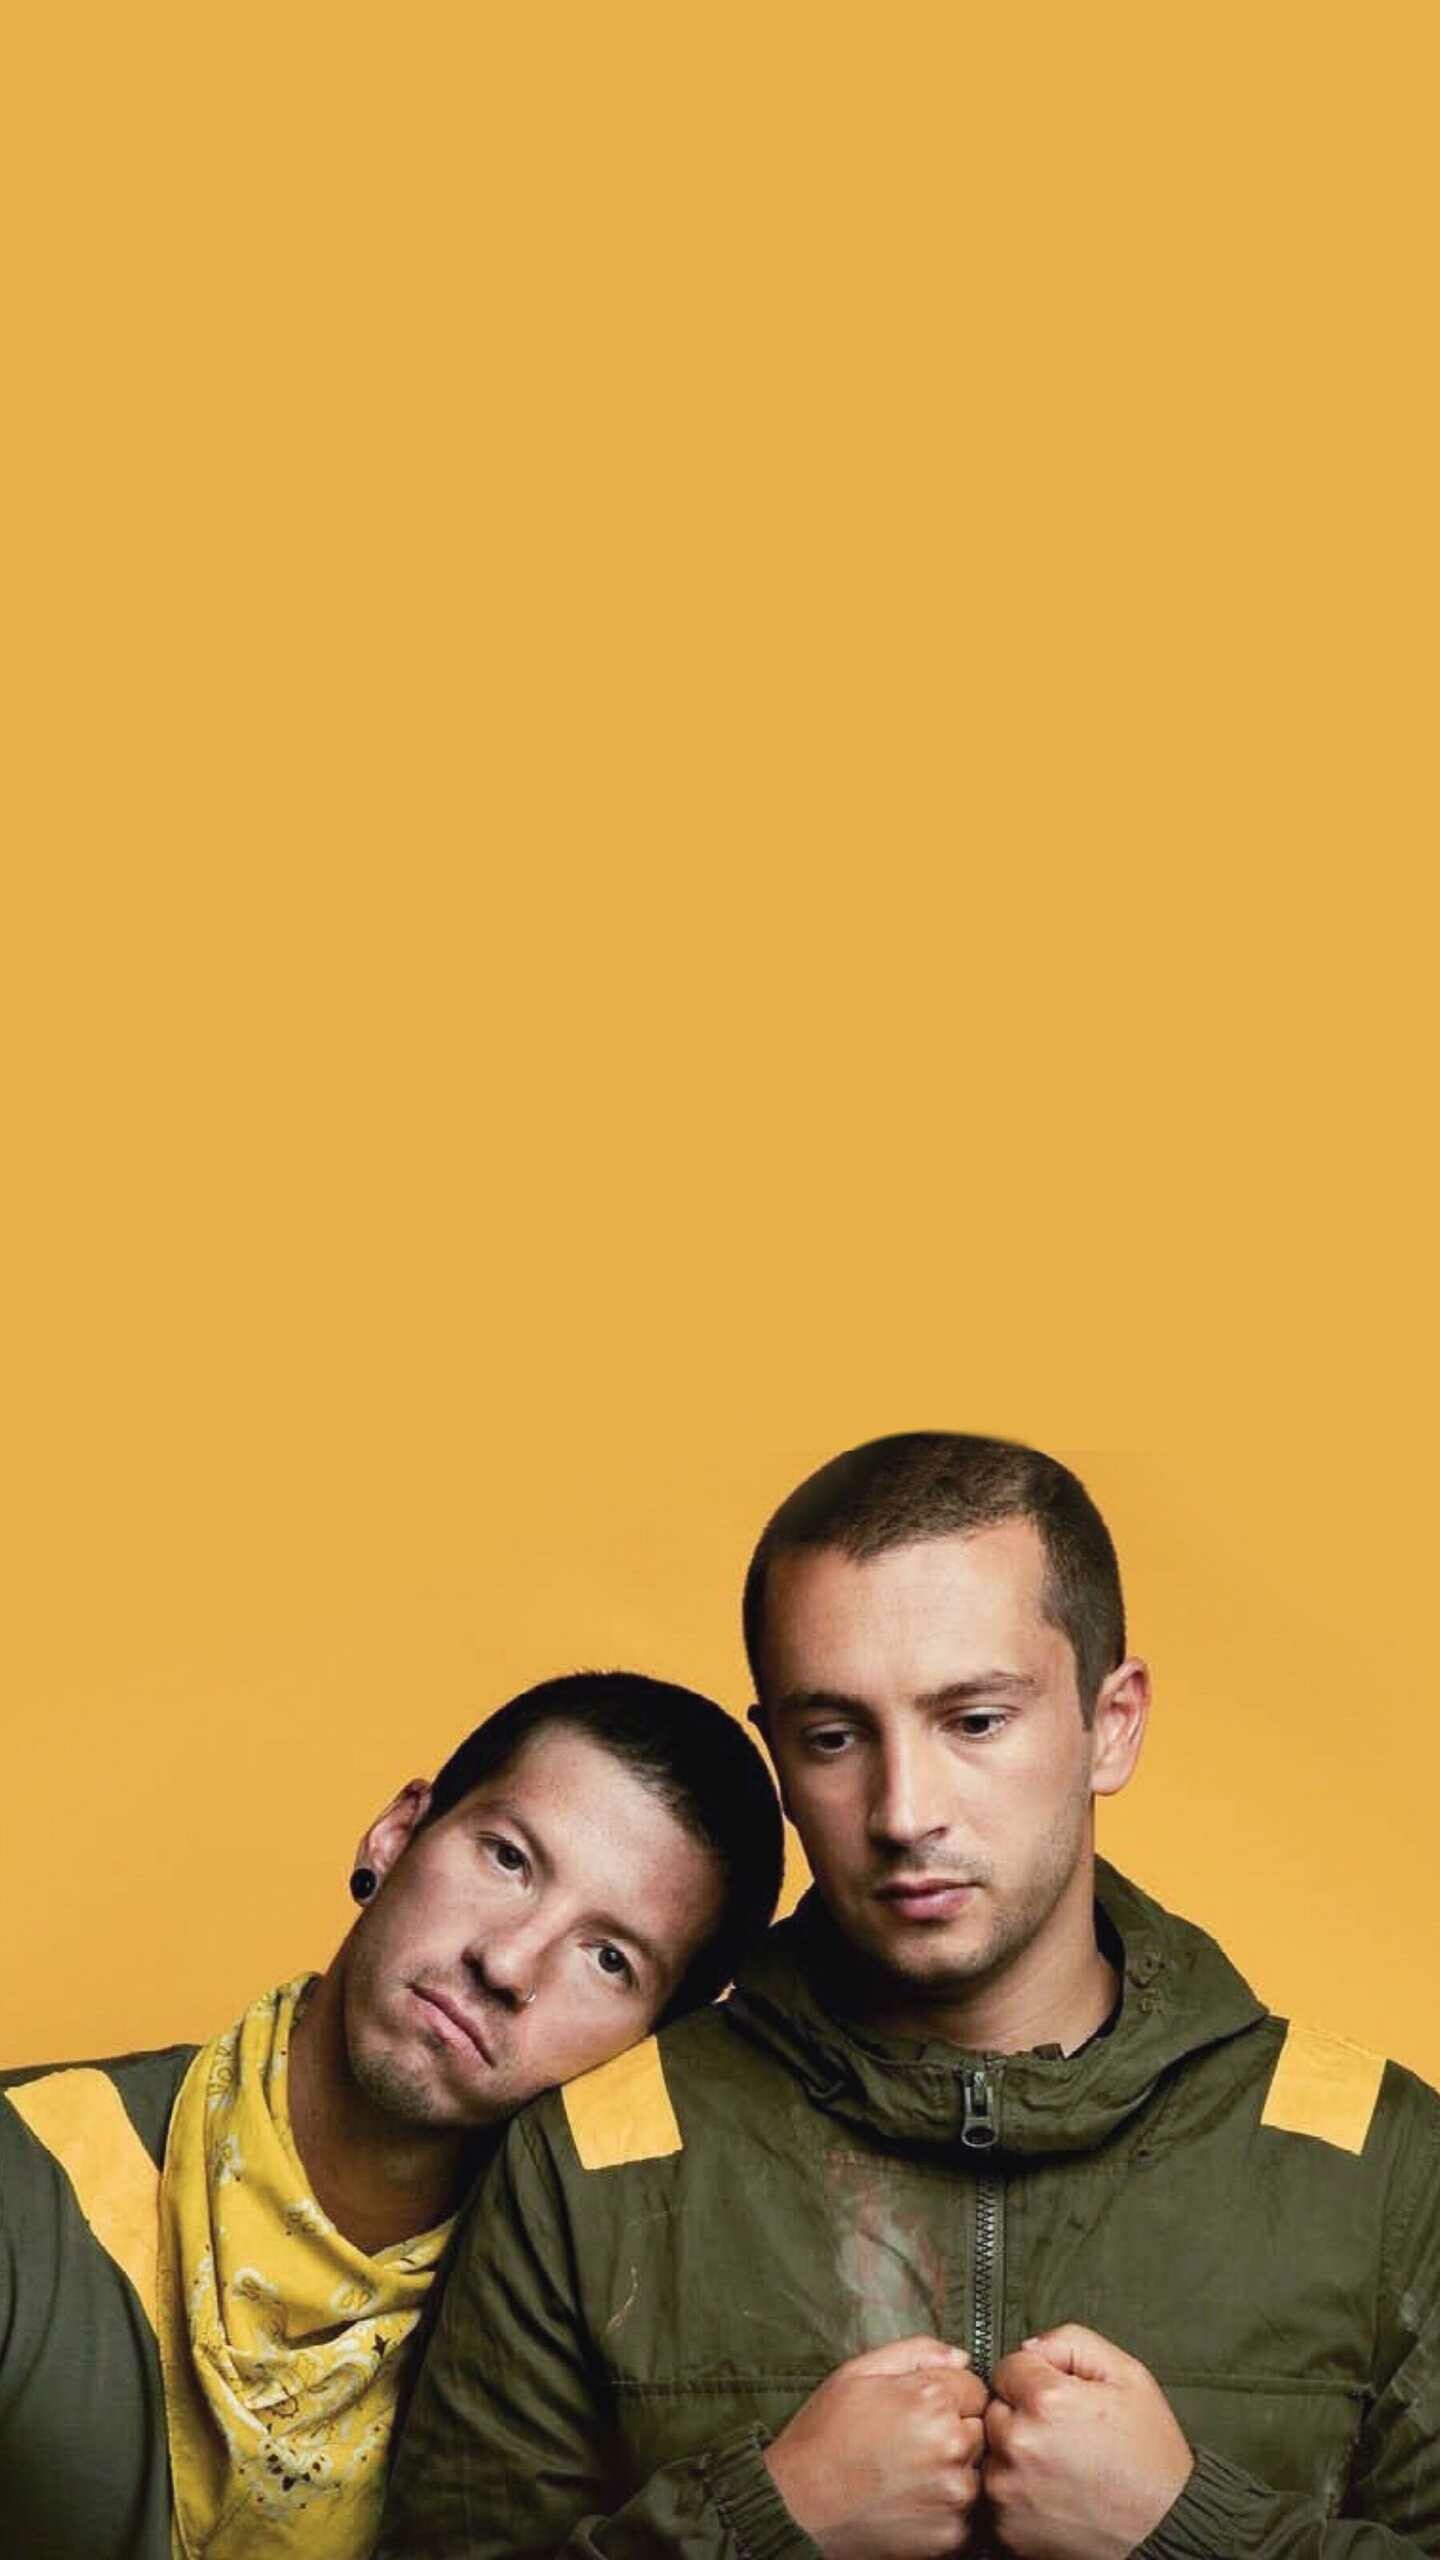 Twenty One Pilots: "Heavydirtysoul" was released as a single from their fourth album by Warner Music Canada in December 2016. 1440x2560 HD Wallpaper.